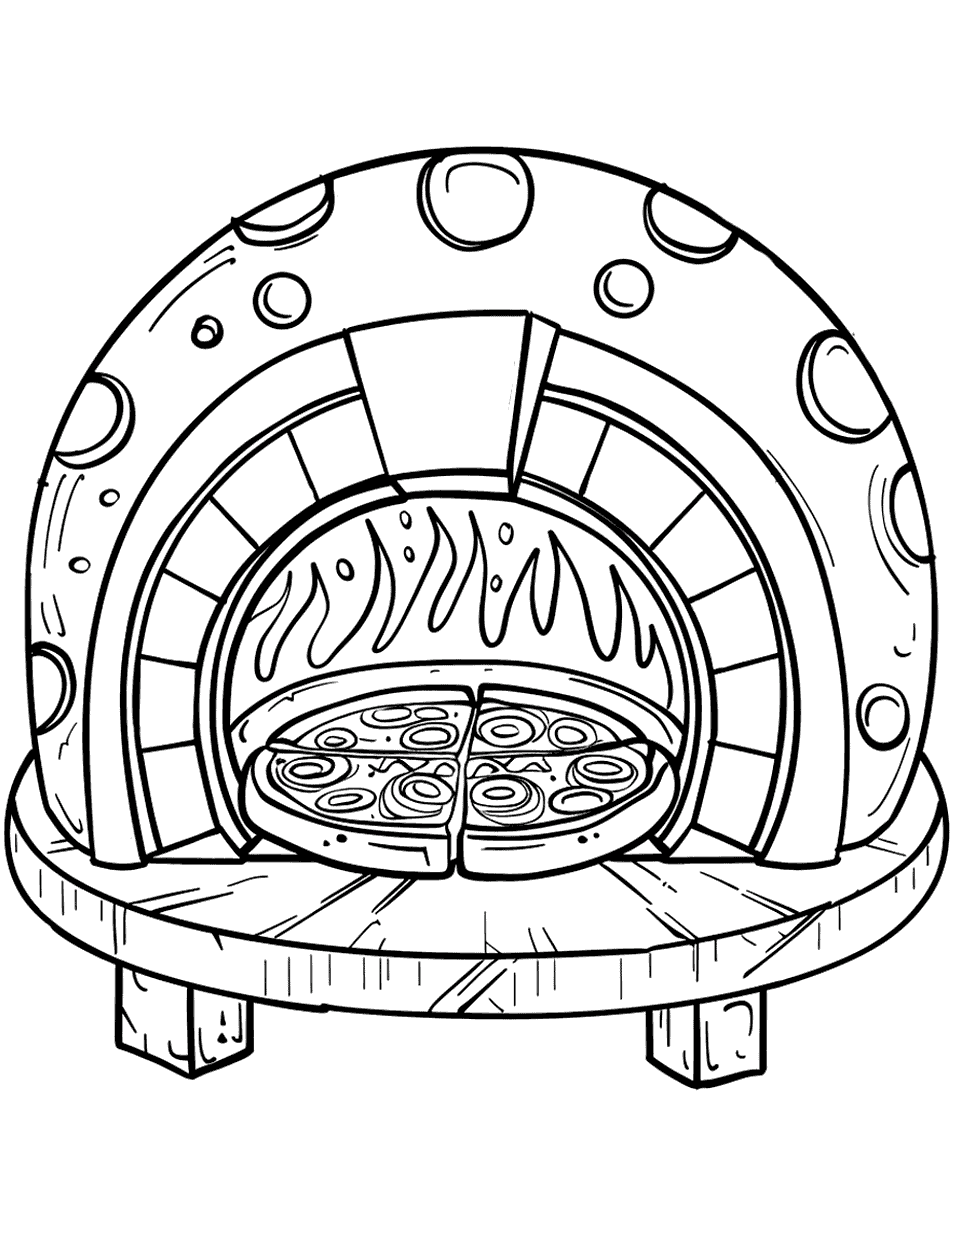 Pizza Oven Adventure Coloring Page - A traditional wood-fired pizza oven with a pizza inside, flames dancing at the back.